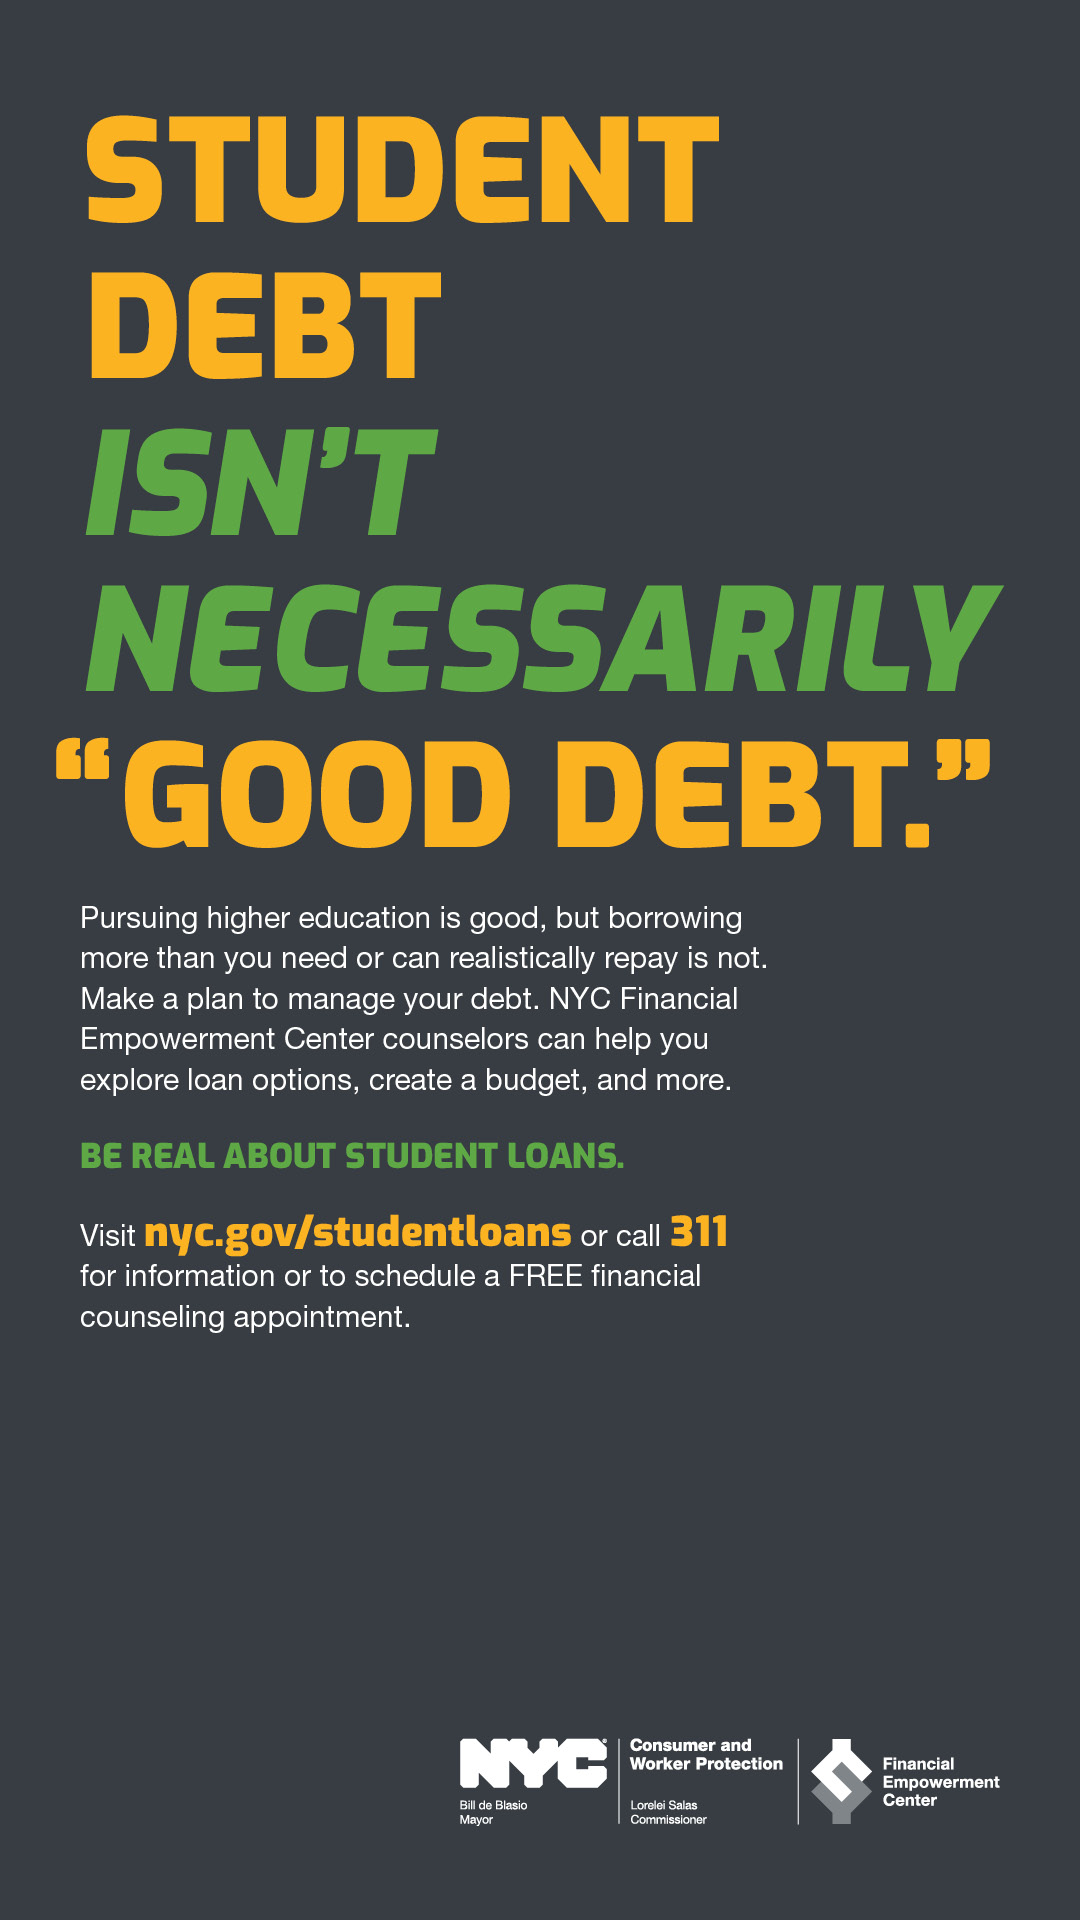 Ad with text STUDENT DEBT ISN’T NECESSARILY GOOD DEBT